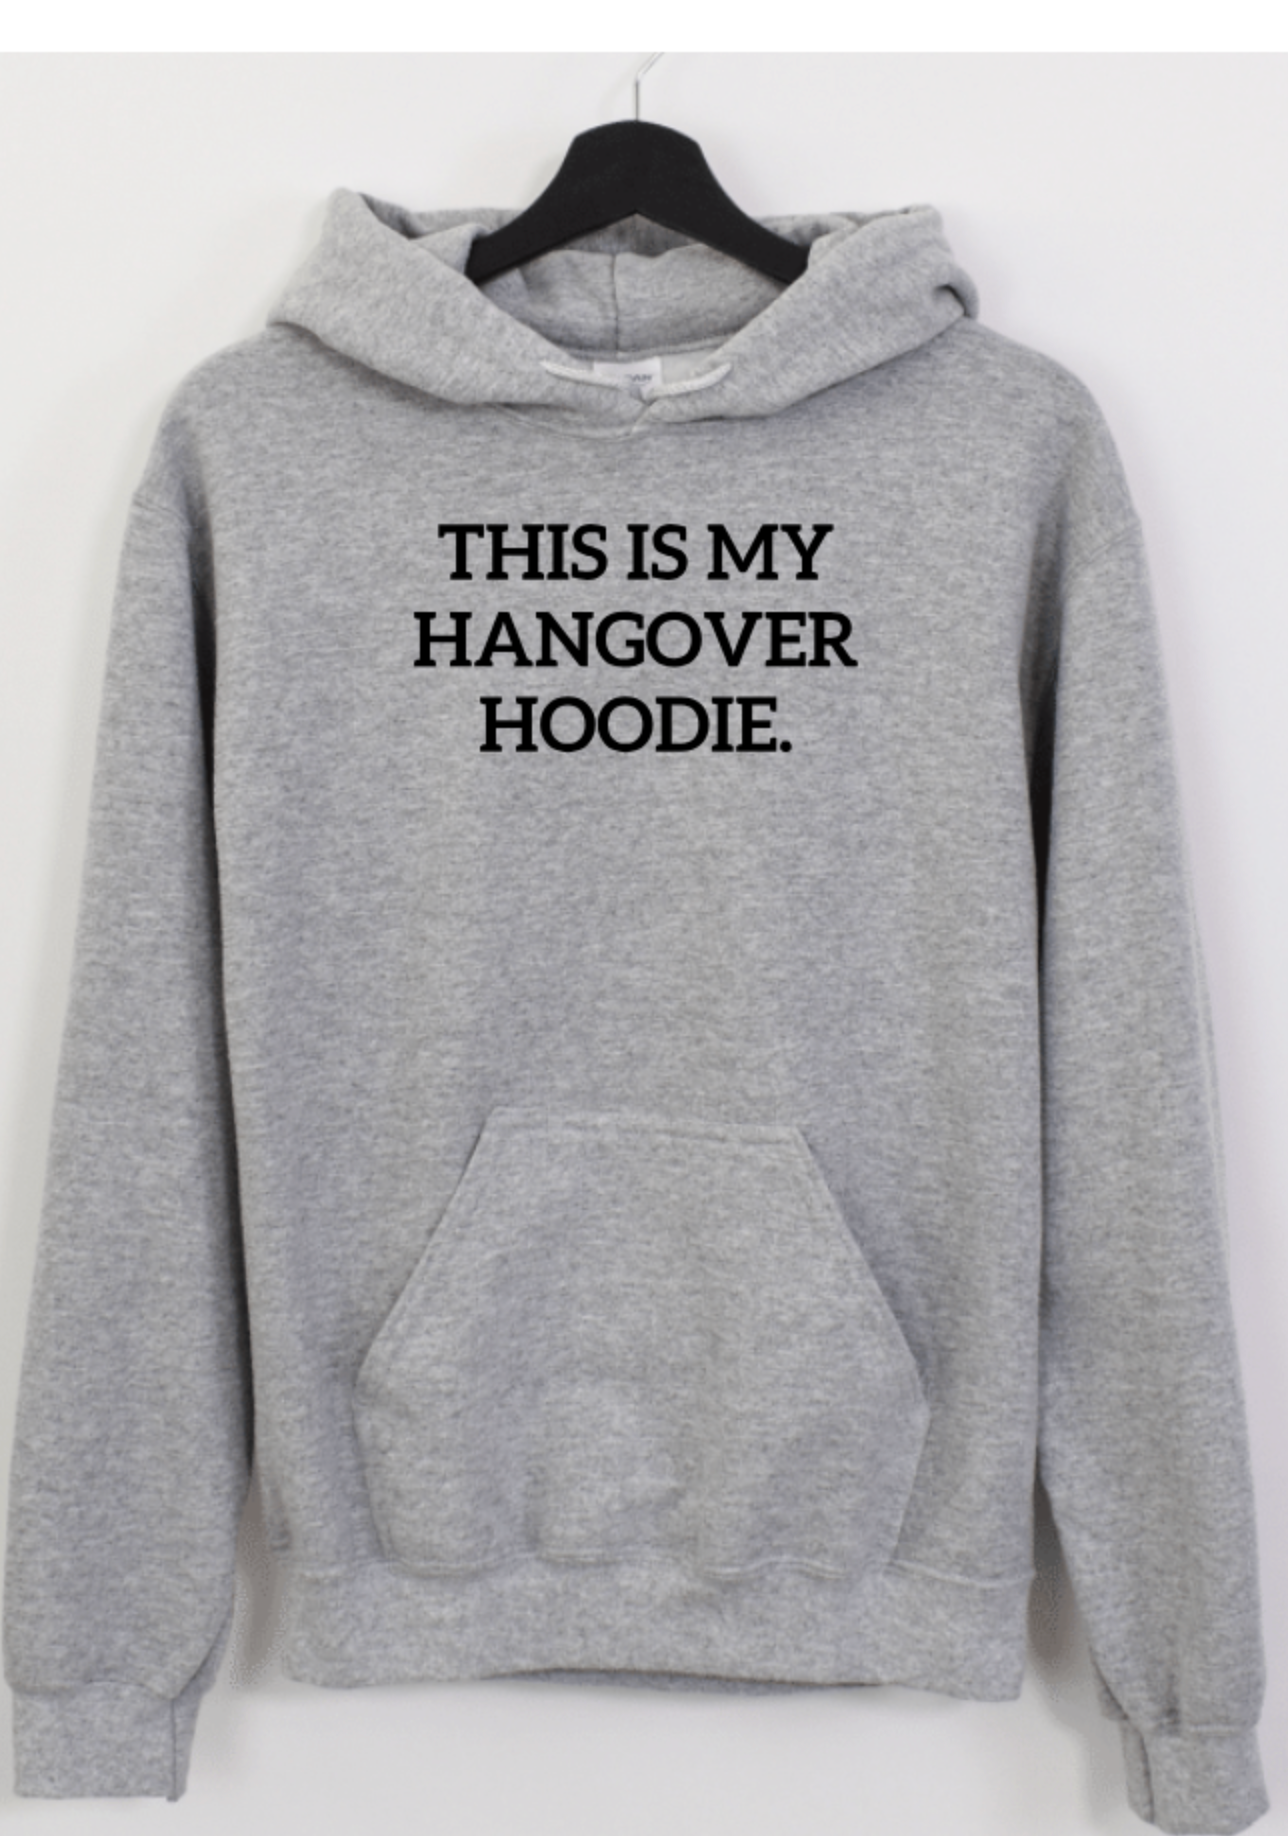 THIS IS MY HANGOVER HOODIE.